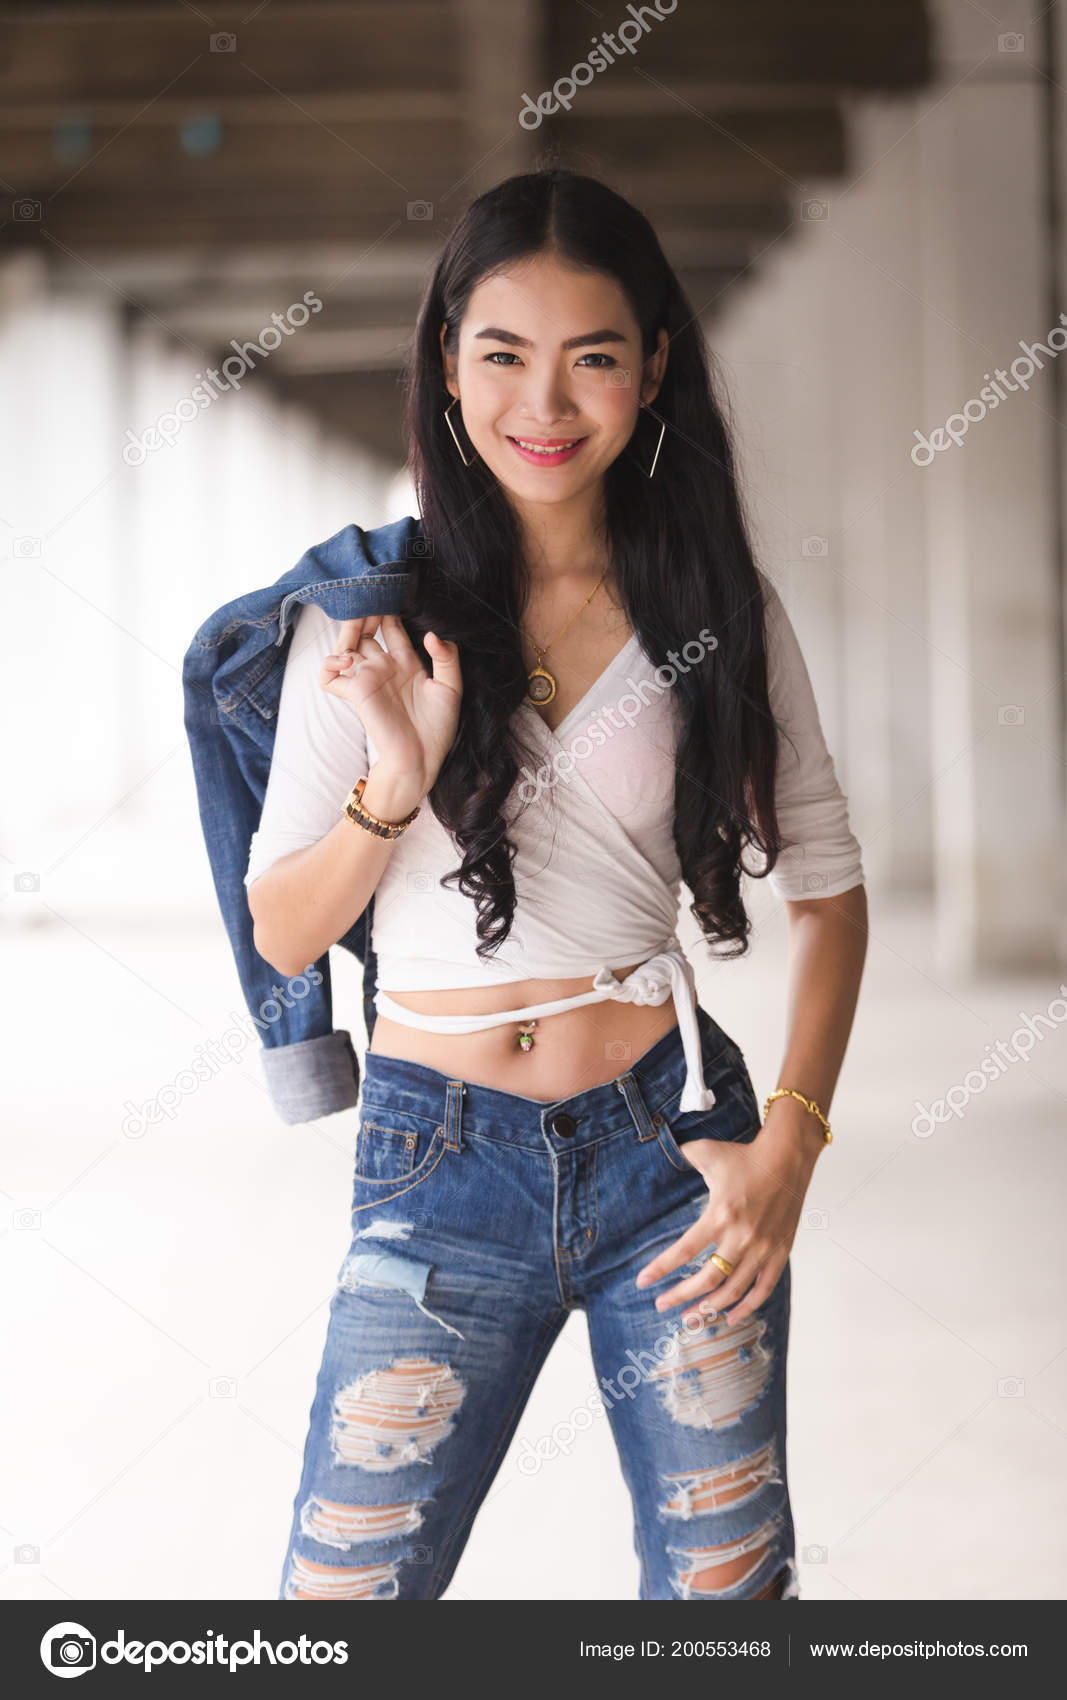 young girl jeans